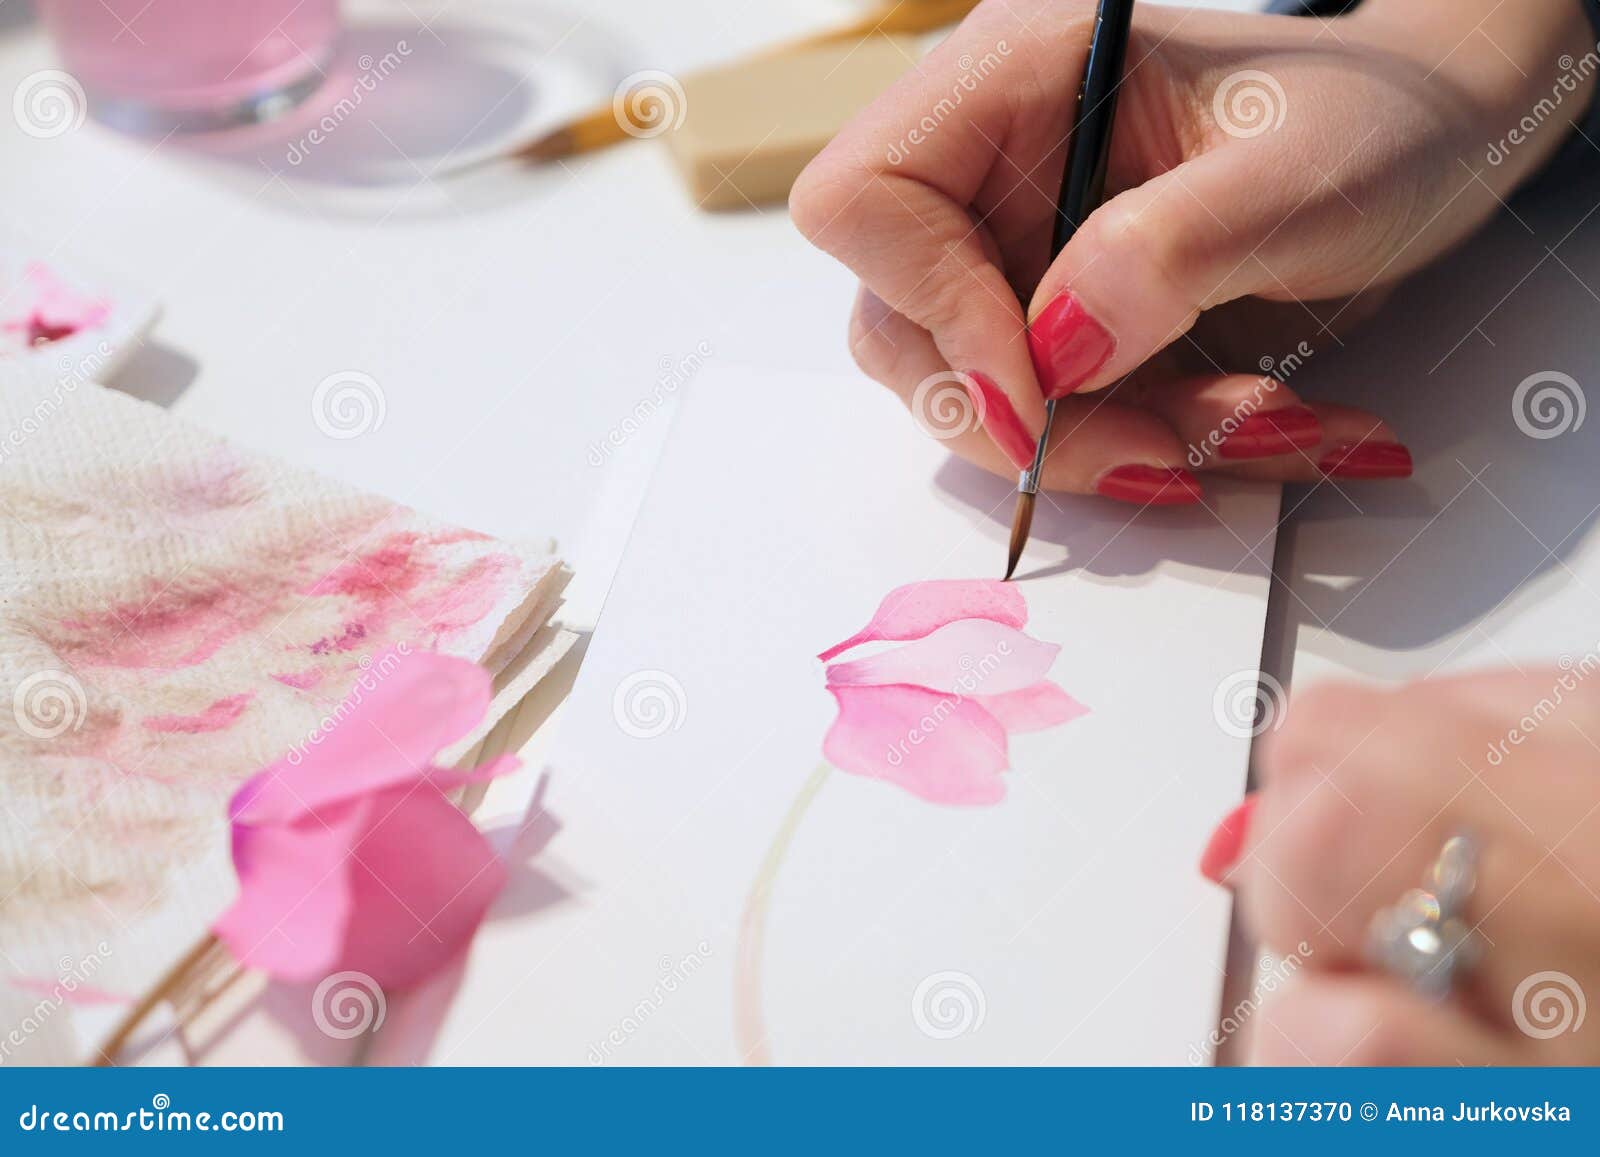 Female Hands with a Brush for Watercolor Paint Stock Photo - Image of ...